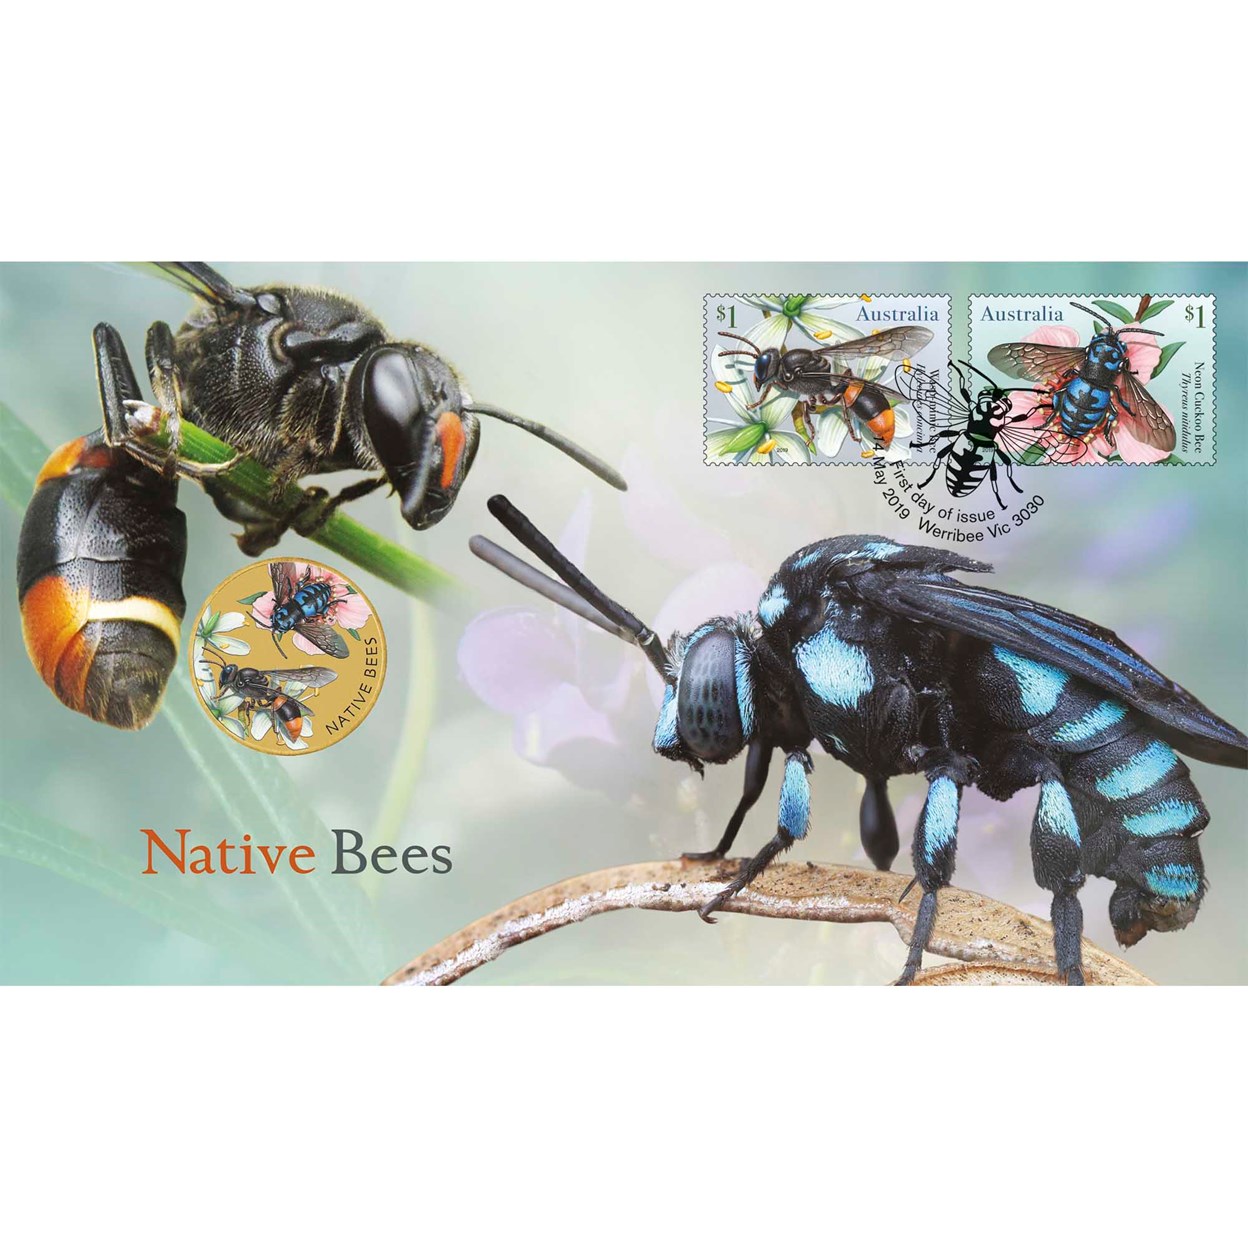 03 native bees 2019 stamp and coin cover PNC